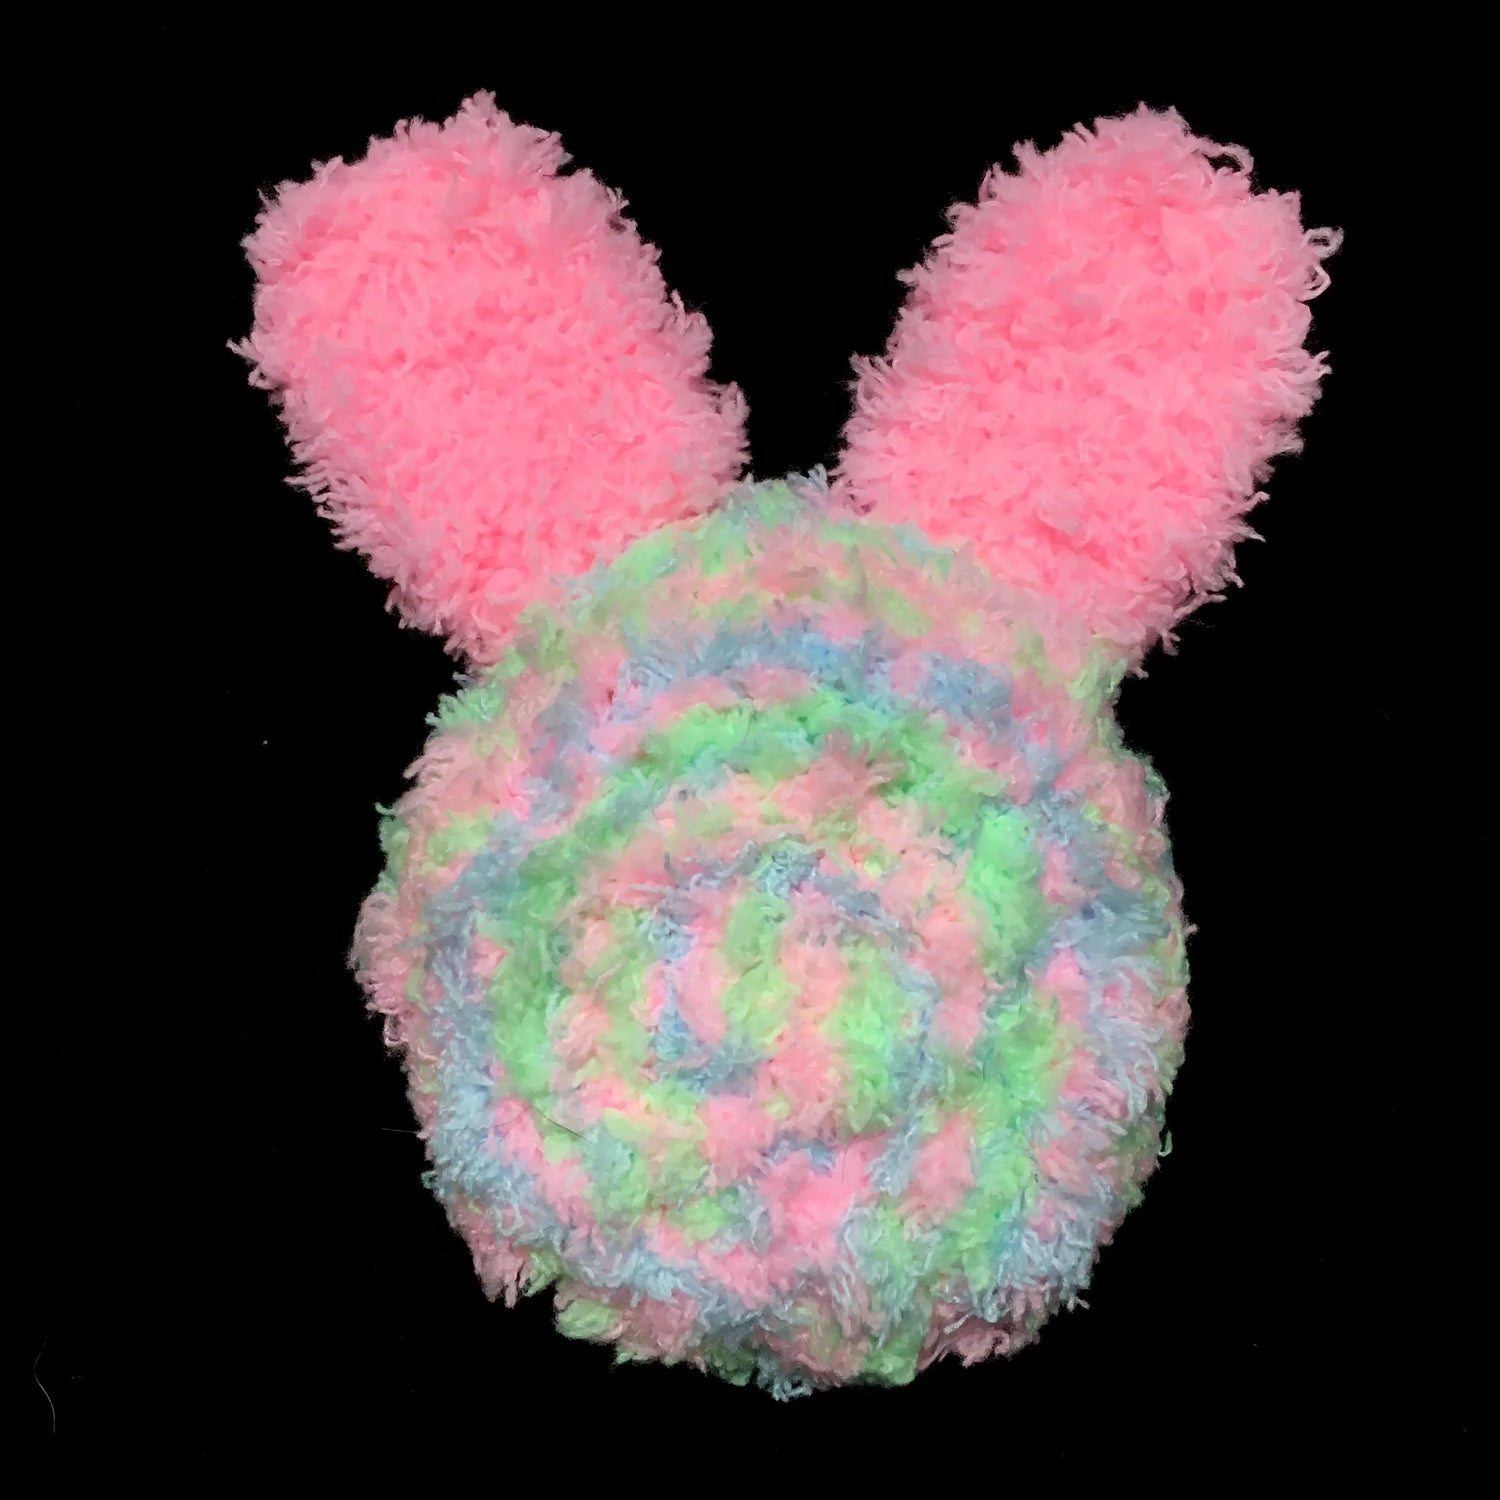 Tamagotchi Multicolor Cover with Bunny Ears Fuzzy N Chic